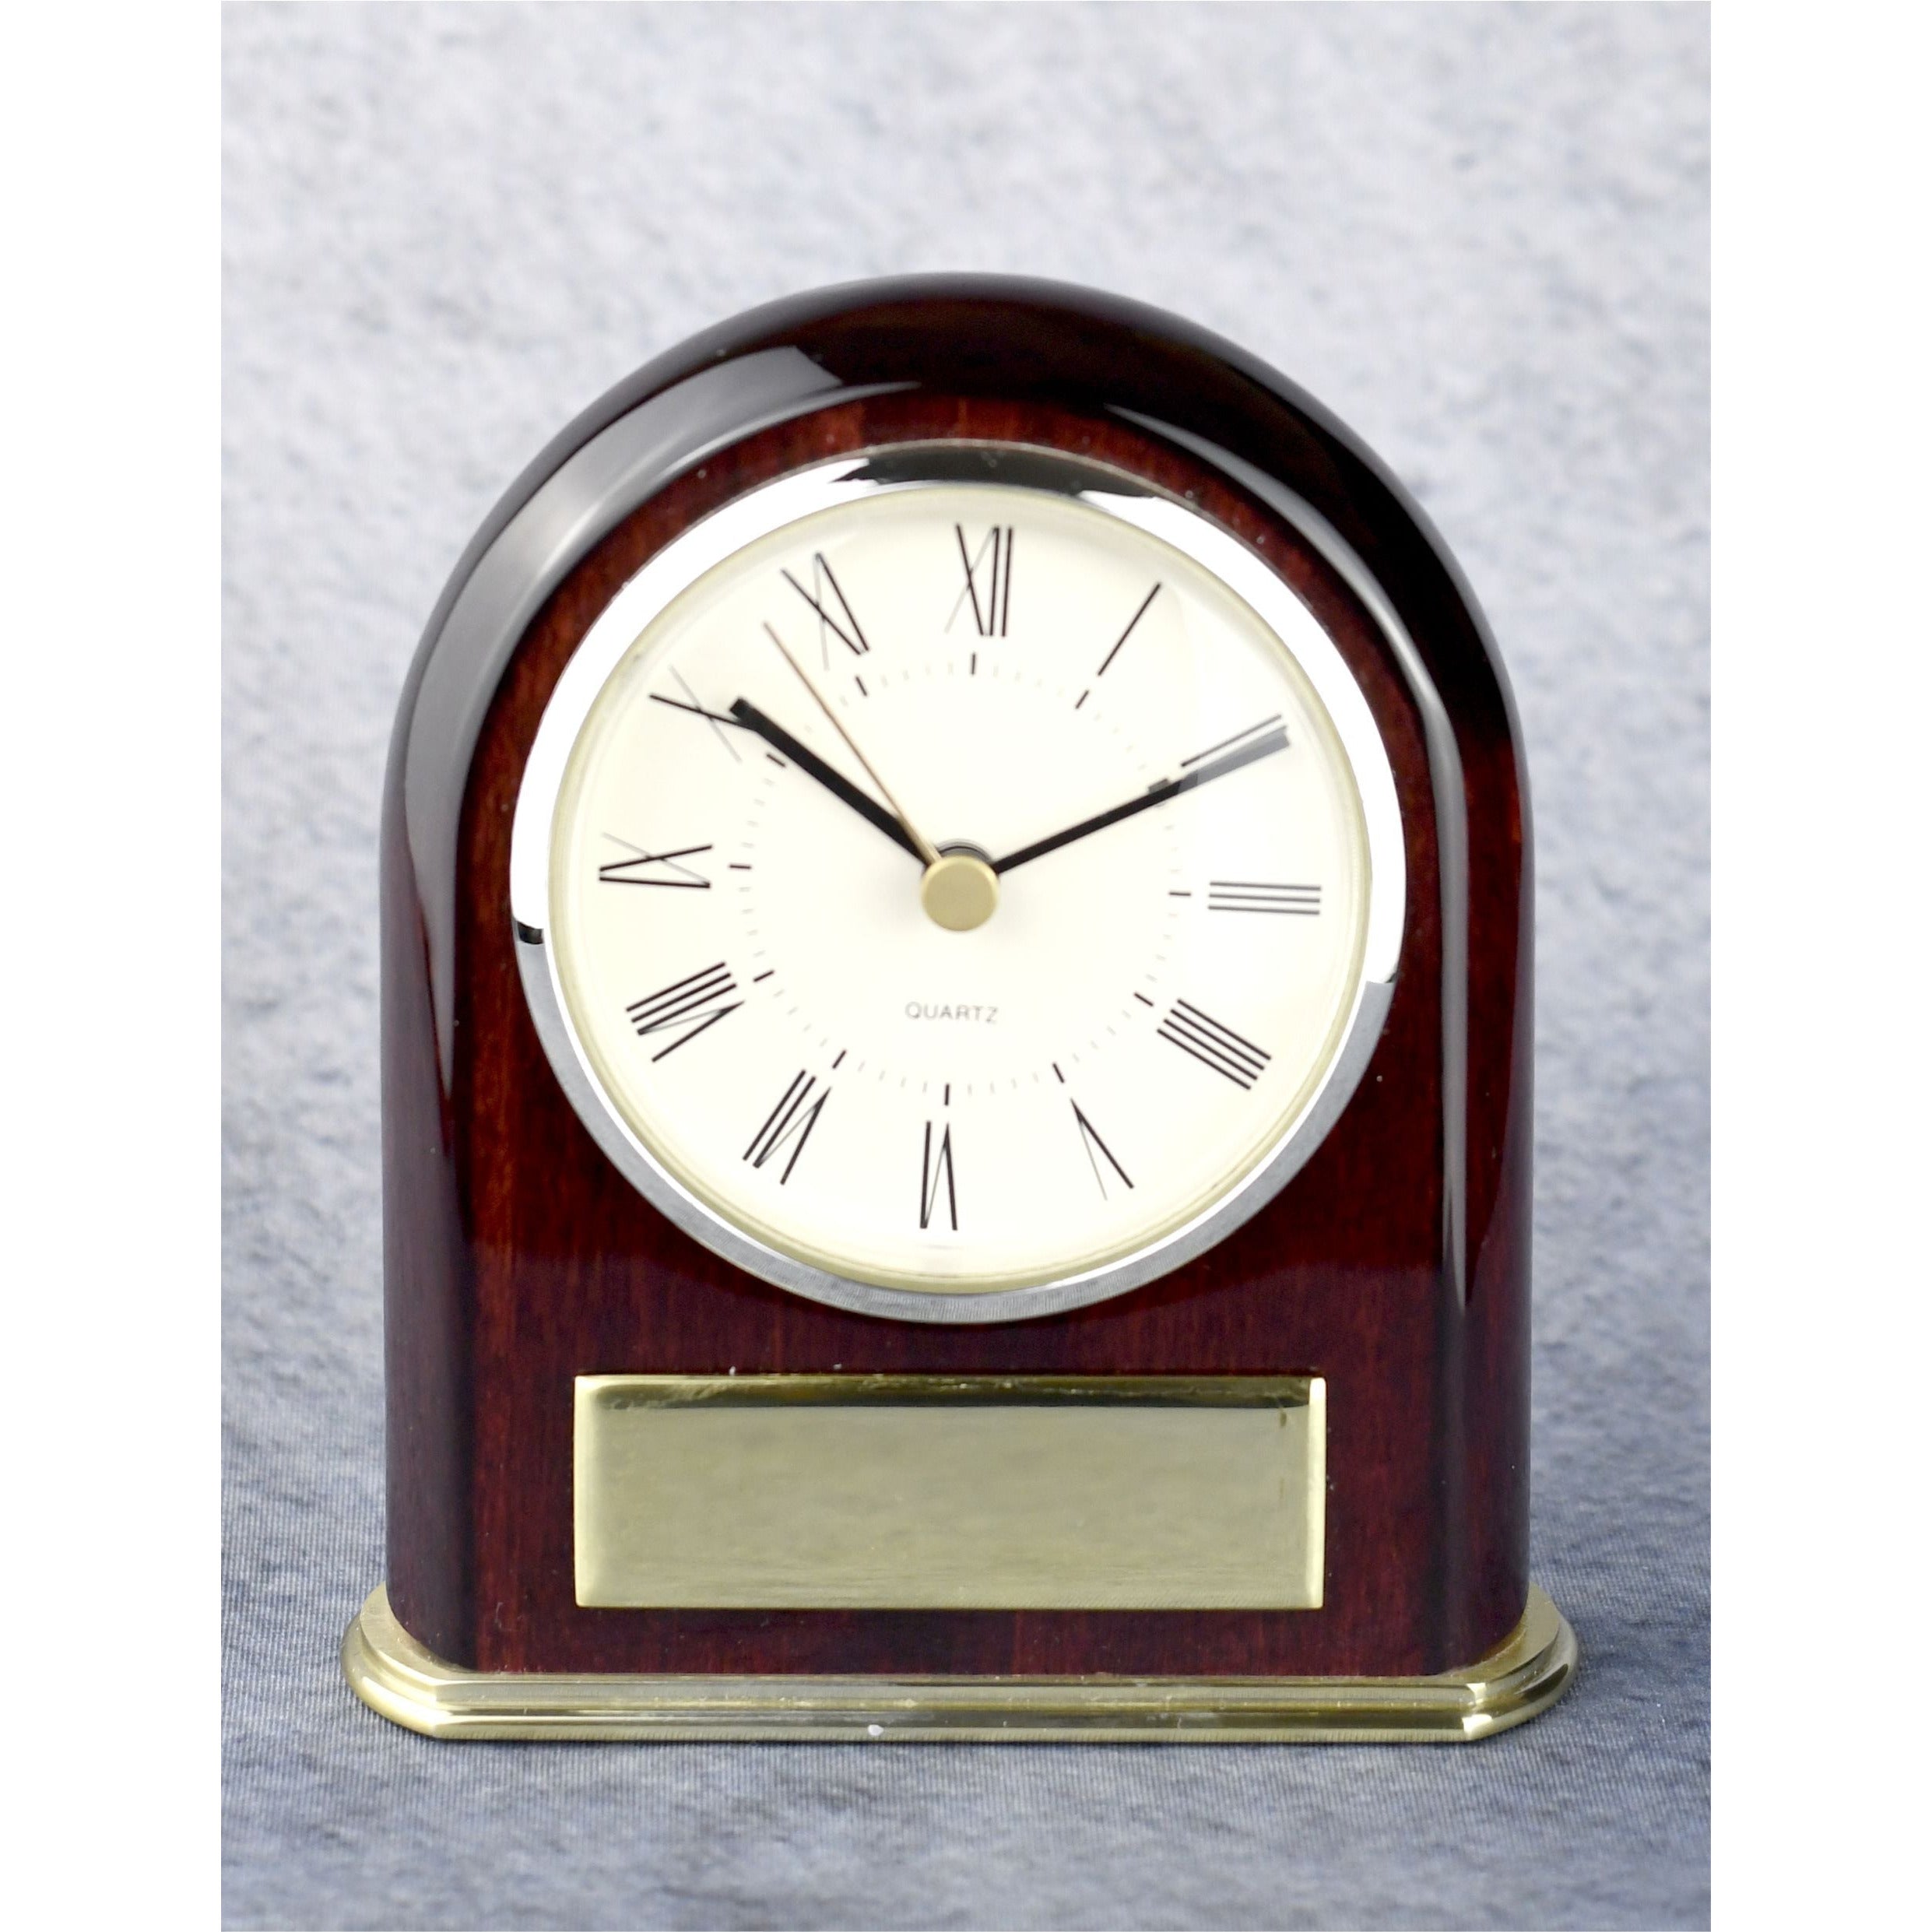 Clock Framed With Rosewood And Brass | Global Recognition Inc